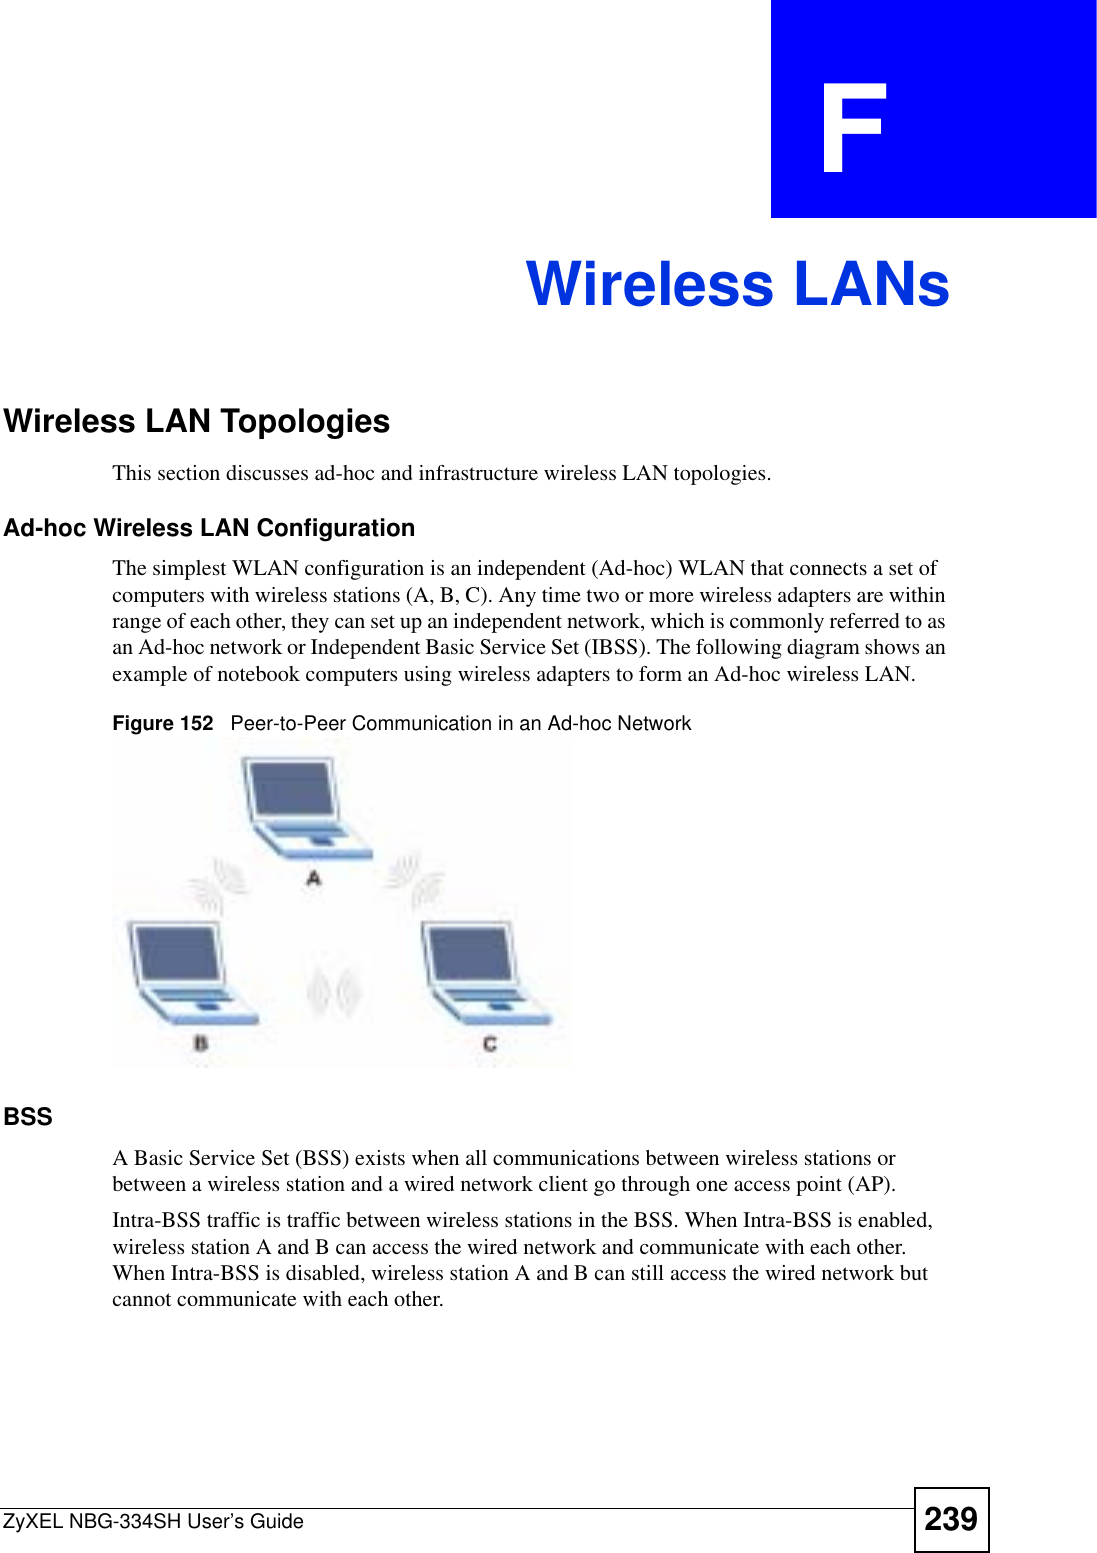 ZyXEL NBG-334SH User’s Guide 239APPENDIX  F Wireless LANsWireless LAN TopologiesThis section discusses ad-hoc and infrastructure wireless LAN topologies.Ad-hoc Wireless LAN ConfigurationThe simplest WLAN configuration is an independent (Ad-hoc) WLAN that connects a set of computers with wireless stations (A, B, C). Any time two or more wireless adapters are within range of each other, they can set up an independent network, which is commonly referred to as an Ad-hoc network or Independent Basic Service Set (IBSS). The following diagram shows an example of notebook computers using wireless adapters to form an Ad-hoc wireless LAN. Figure 152   Peer-to-Peer Communication in an Ad-hoc NetworkBSSA Basic Service Set (BSS) exists when all communications between wireless stations or between a wireless station and a wired network client go through one access point (AP). Intra-BSS traffic is traffic between wireless stations in the BSS. When Intra-BSS is enabled, wireless station A and B can access the wired network and communicate with each other. When Intra-BSS is disabled, wireless station A and B can still access the wired network but cannot communicate with each other.